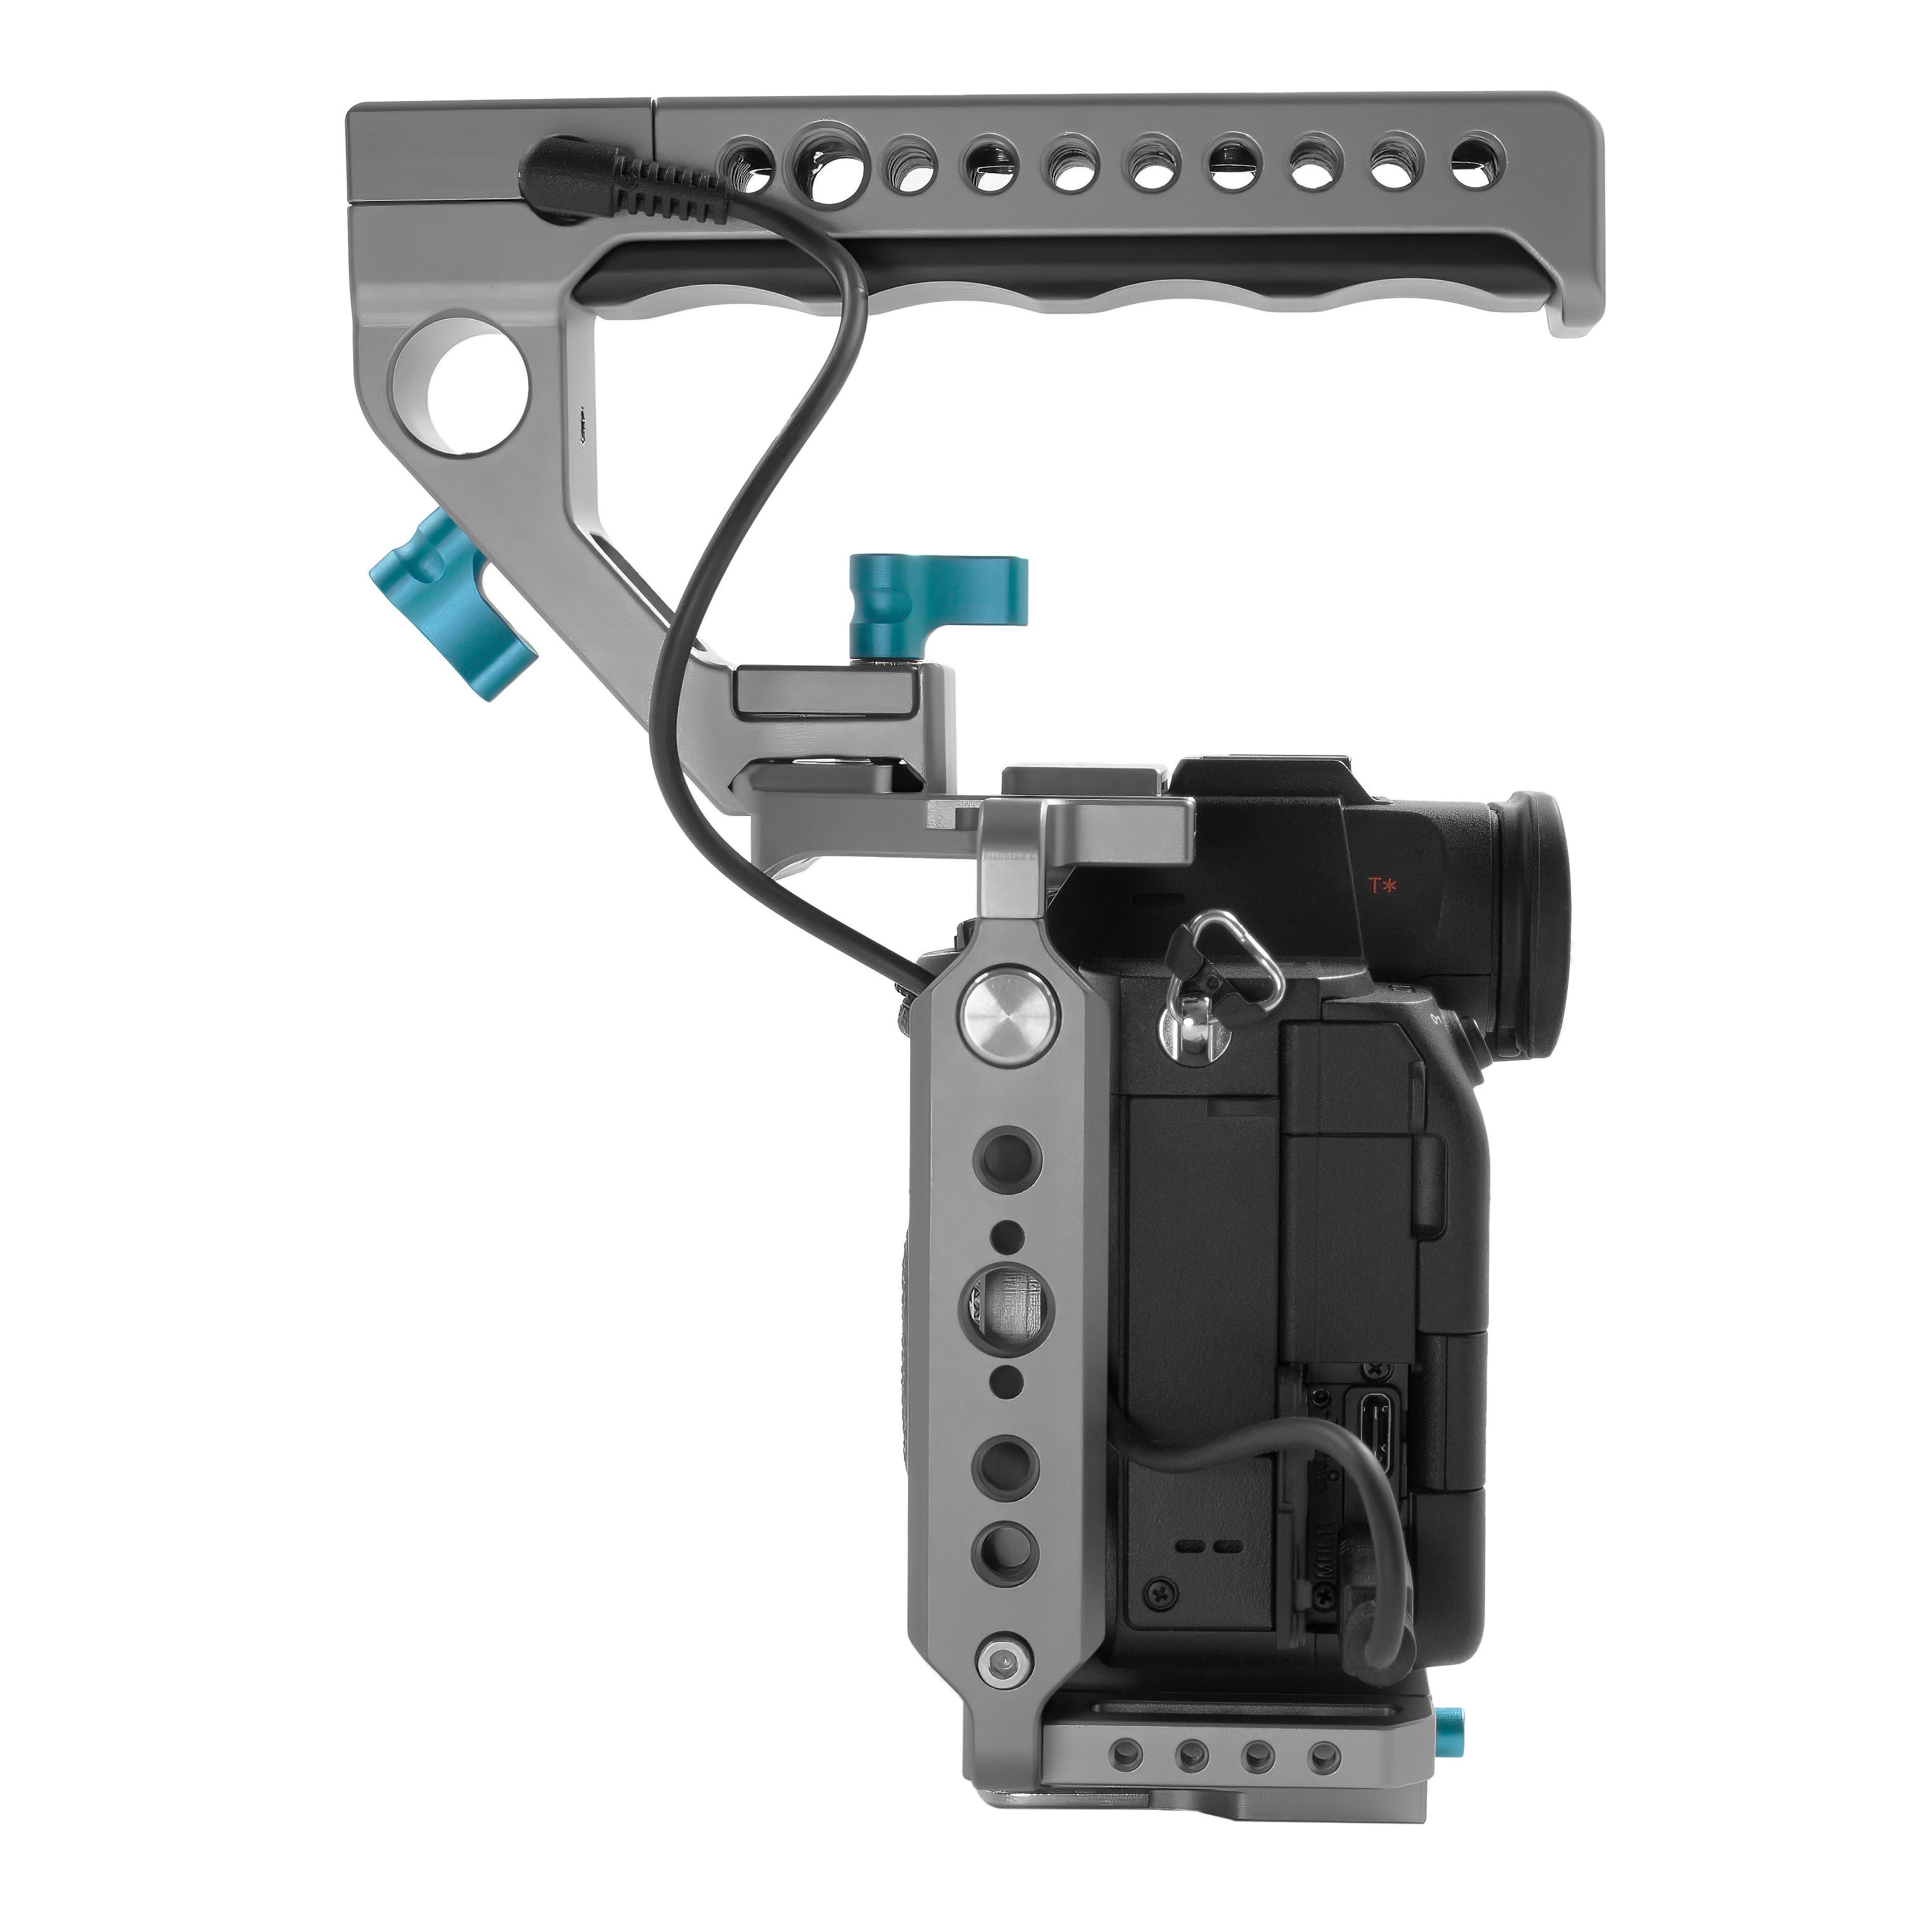 Kondor Blue A7SIII Cage with Start-Stop Trigger Handle for A7 Series Cameras (Space Gray)